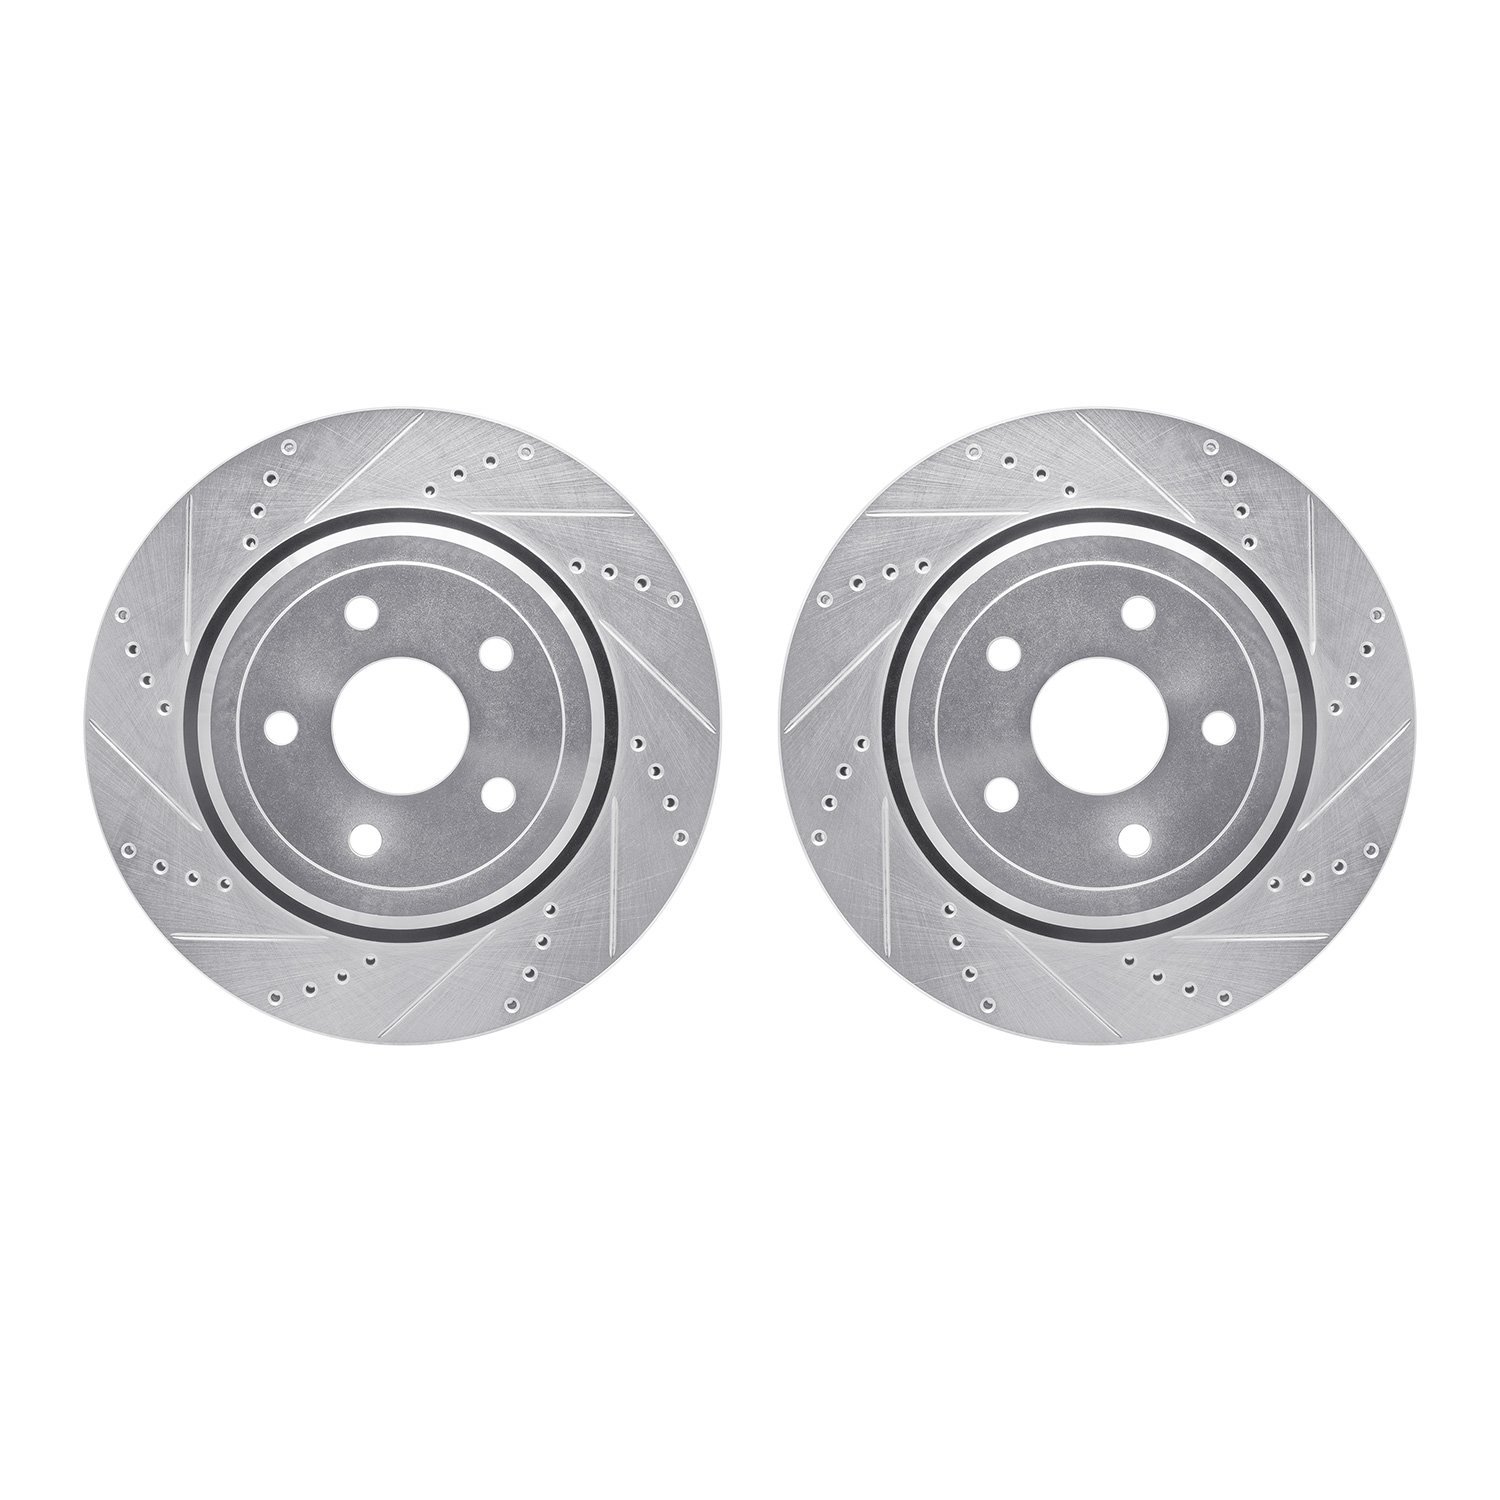 7002-42027 Drilled/Slotted Brake Rotors [Silver], Fits Select Mopar, Position: Rear